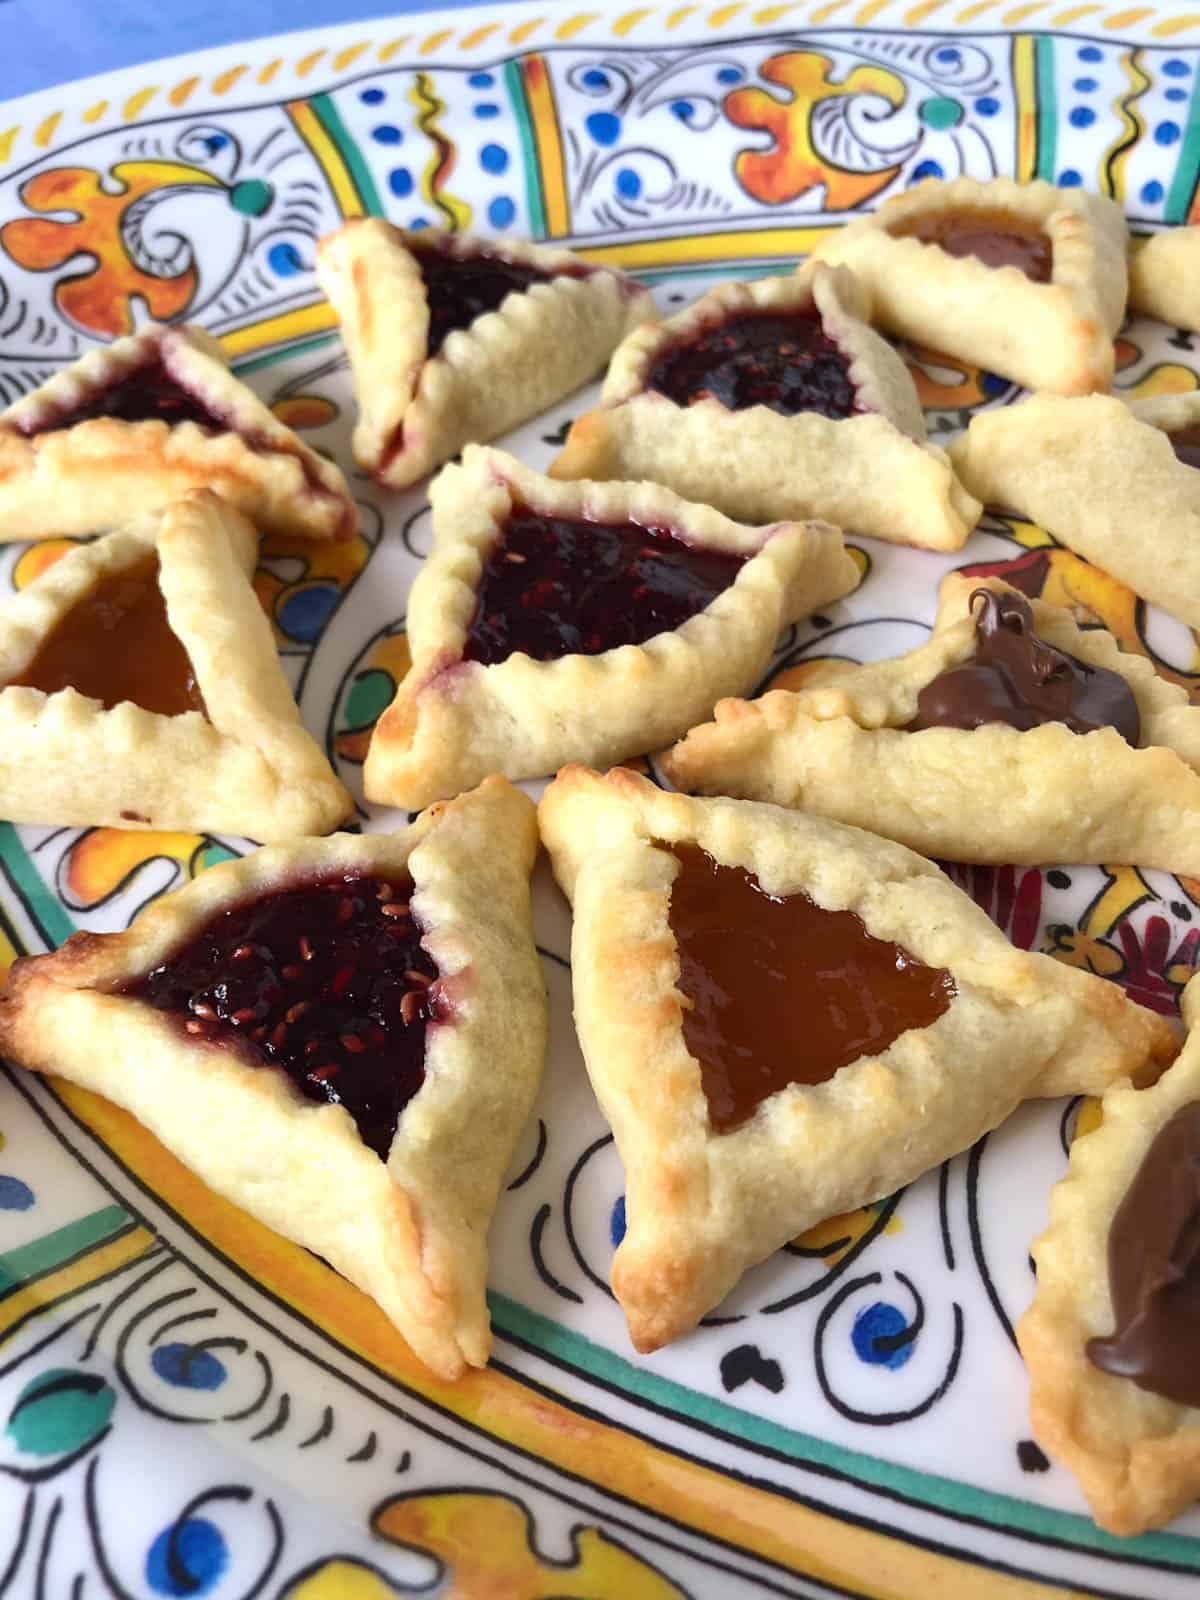 Several flavors of hamantaschen on a plate.